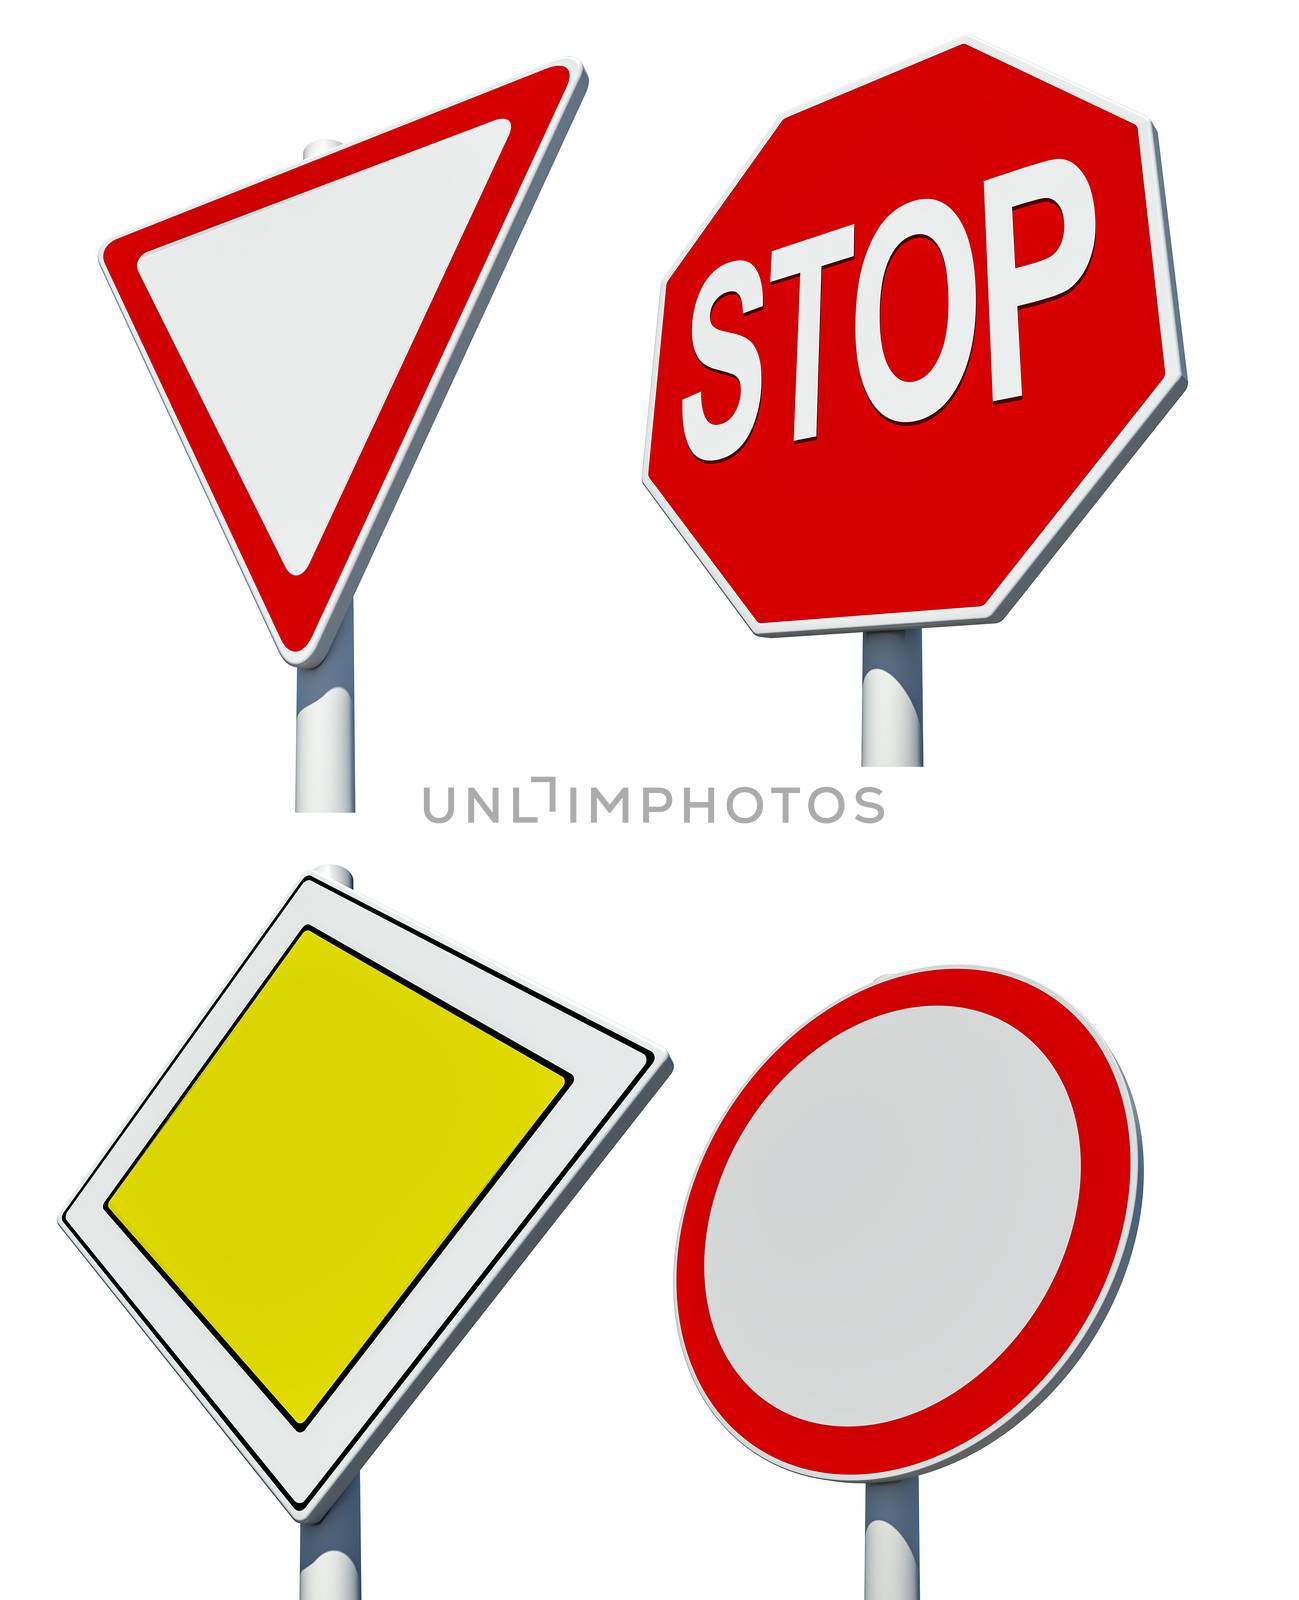 Set of road signs isolated on white background. 3d illustration.